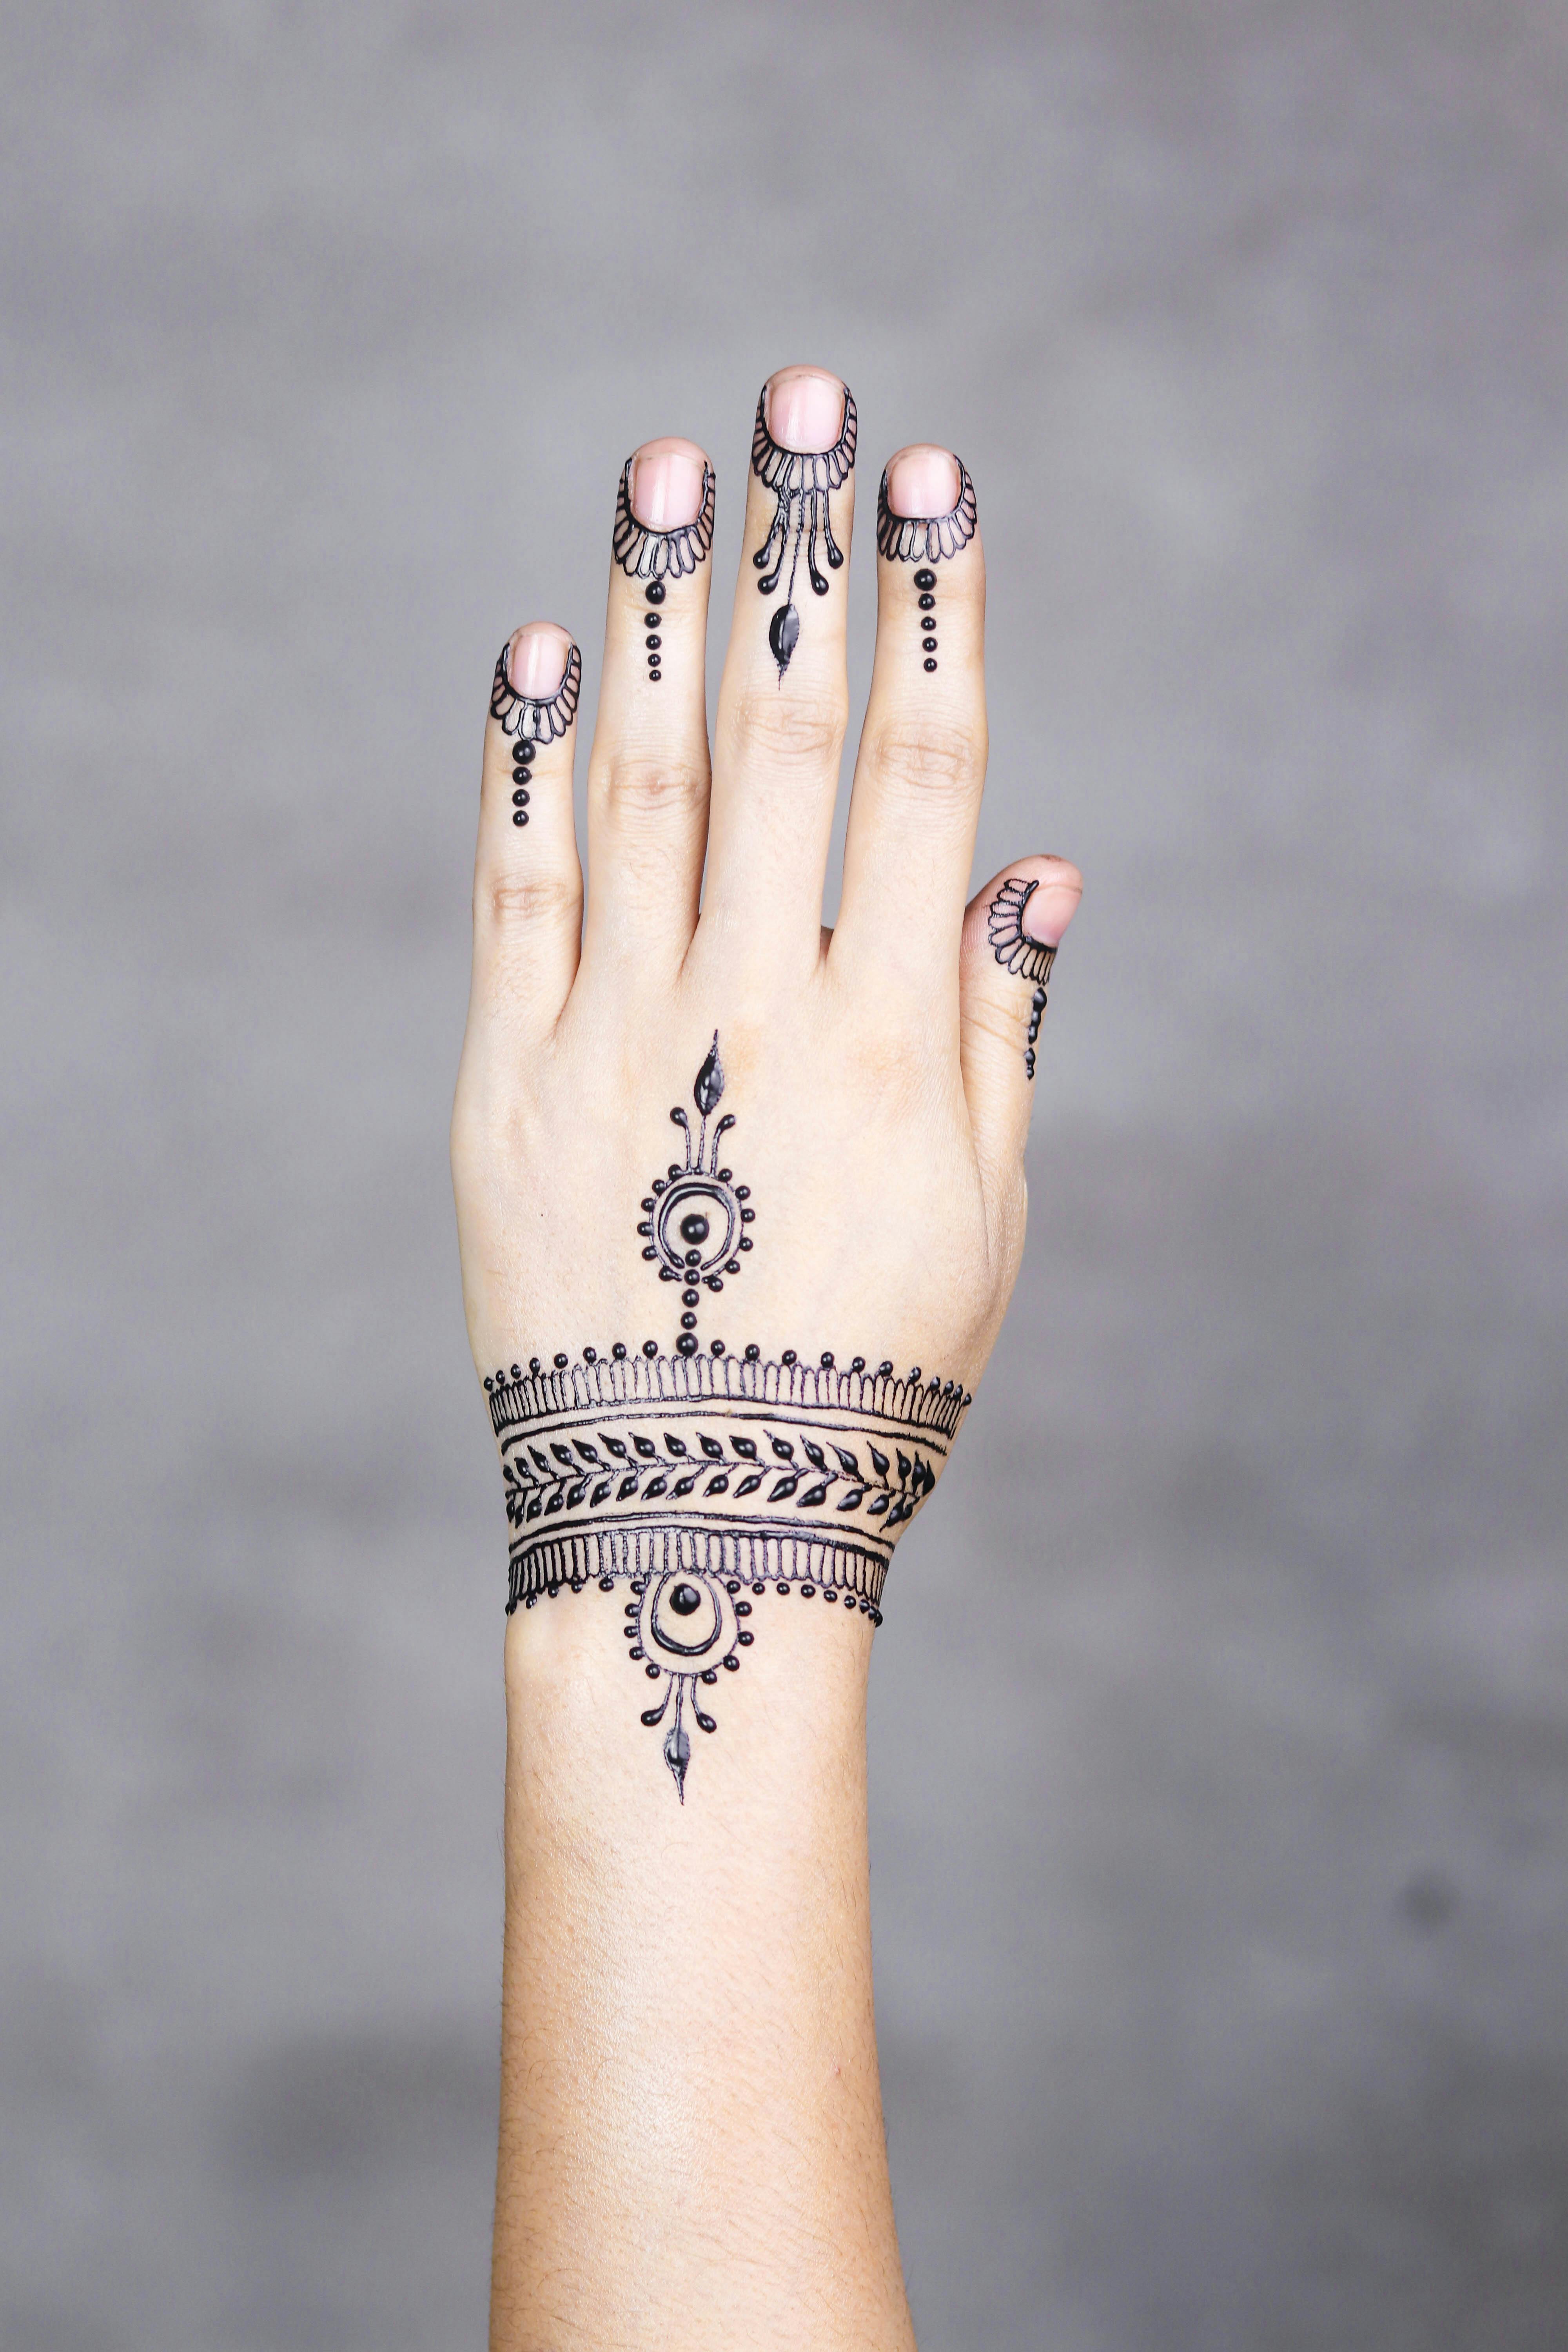 Eid Mehndi Designs 2023: Beautiful Arabic Mehndi Patterns and Henna Designs  to Apply on Hands For Eid ul-Fitr Celebrations | 🙏🏻 LatestLY